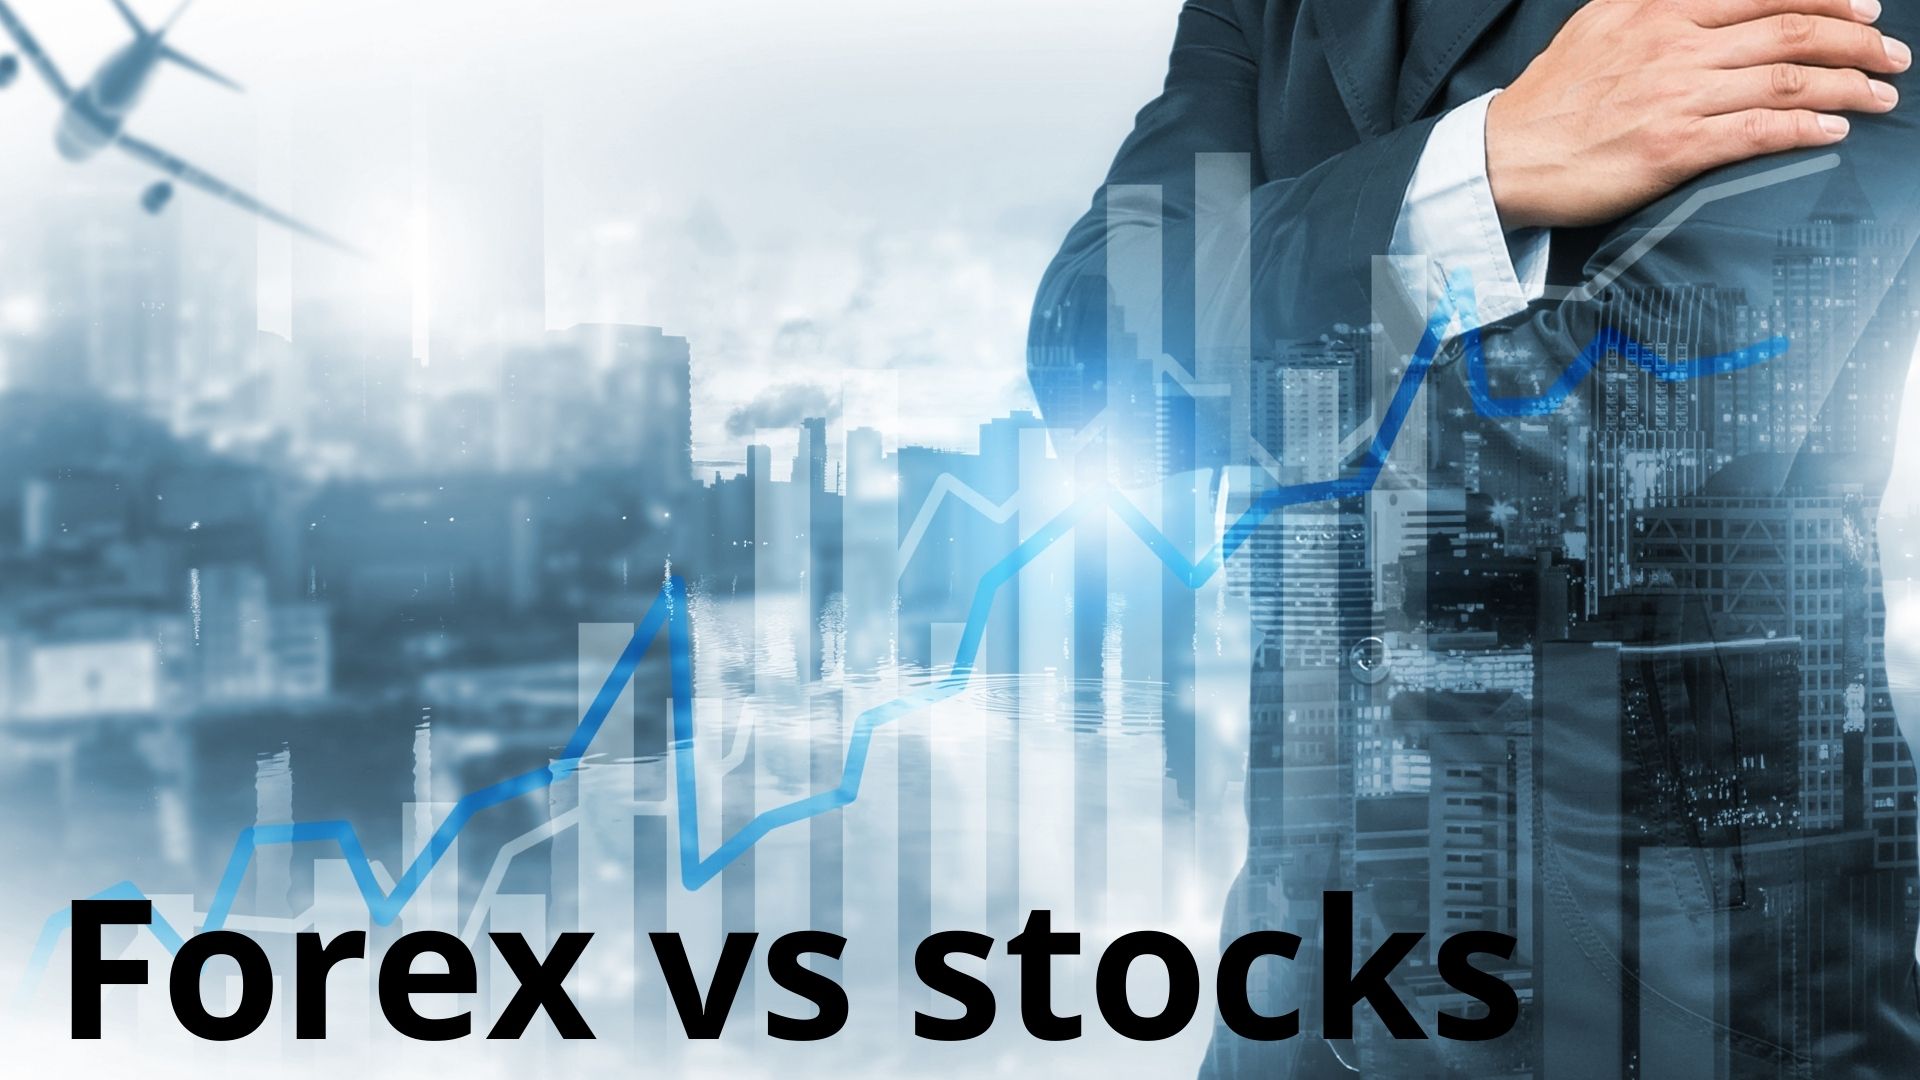 Getting to know which one to invest in Forex vs stocks vs futures